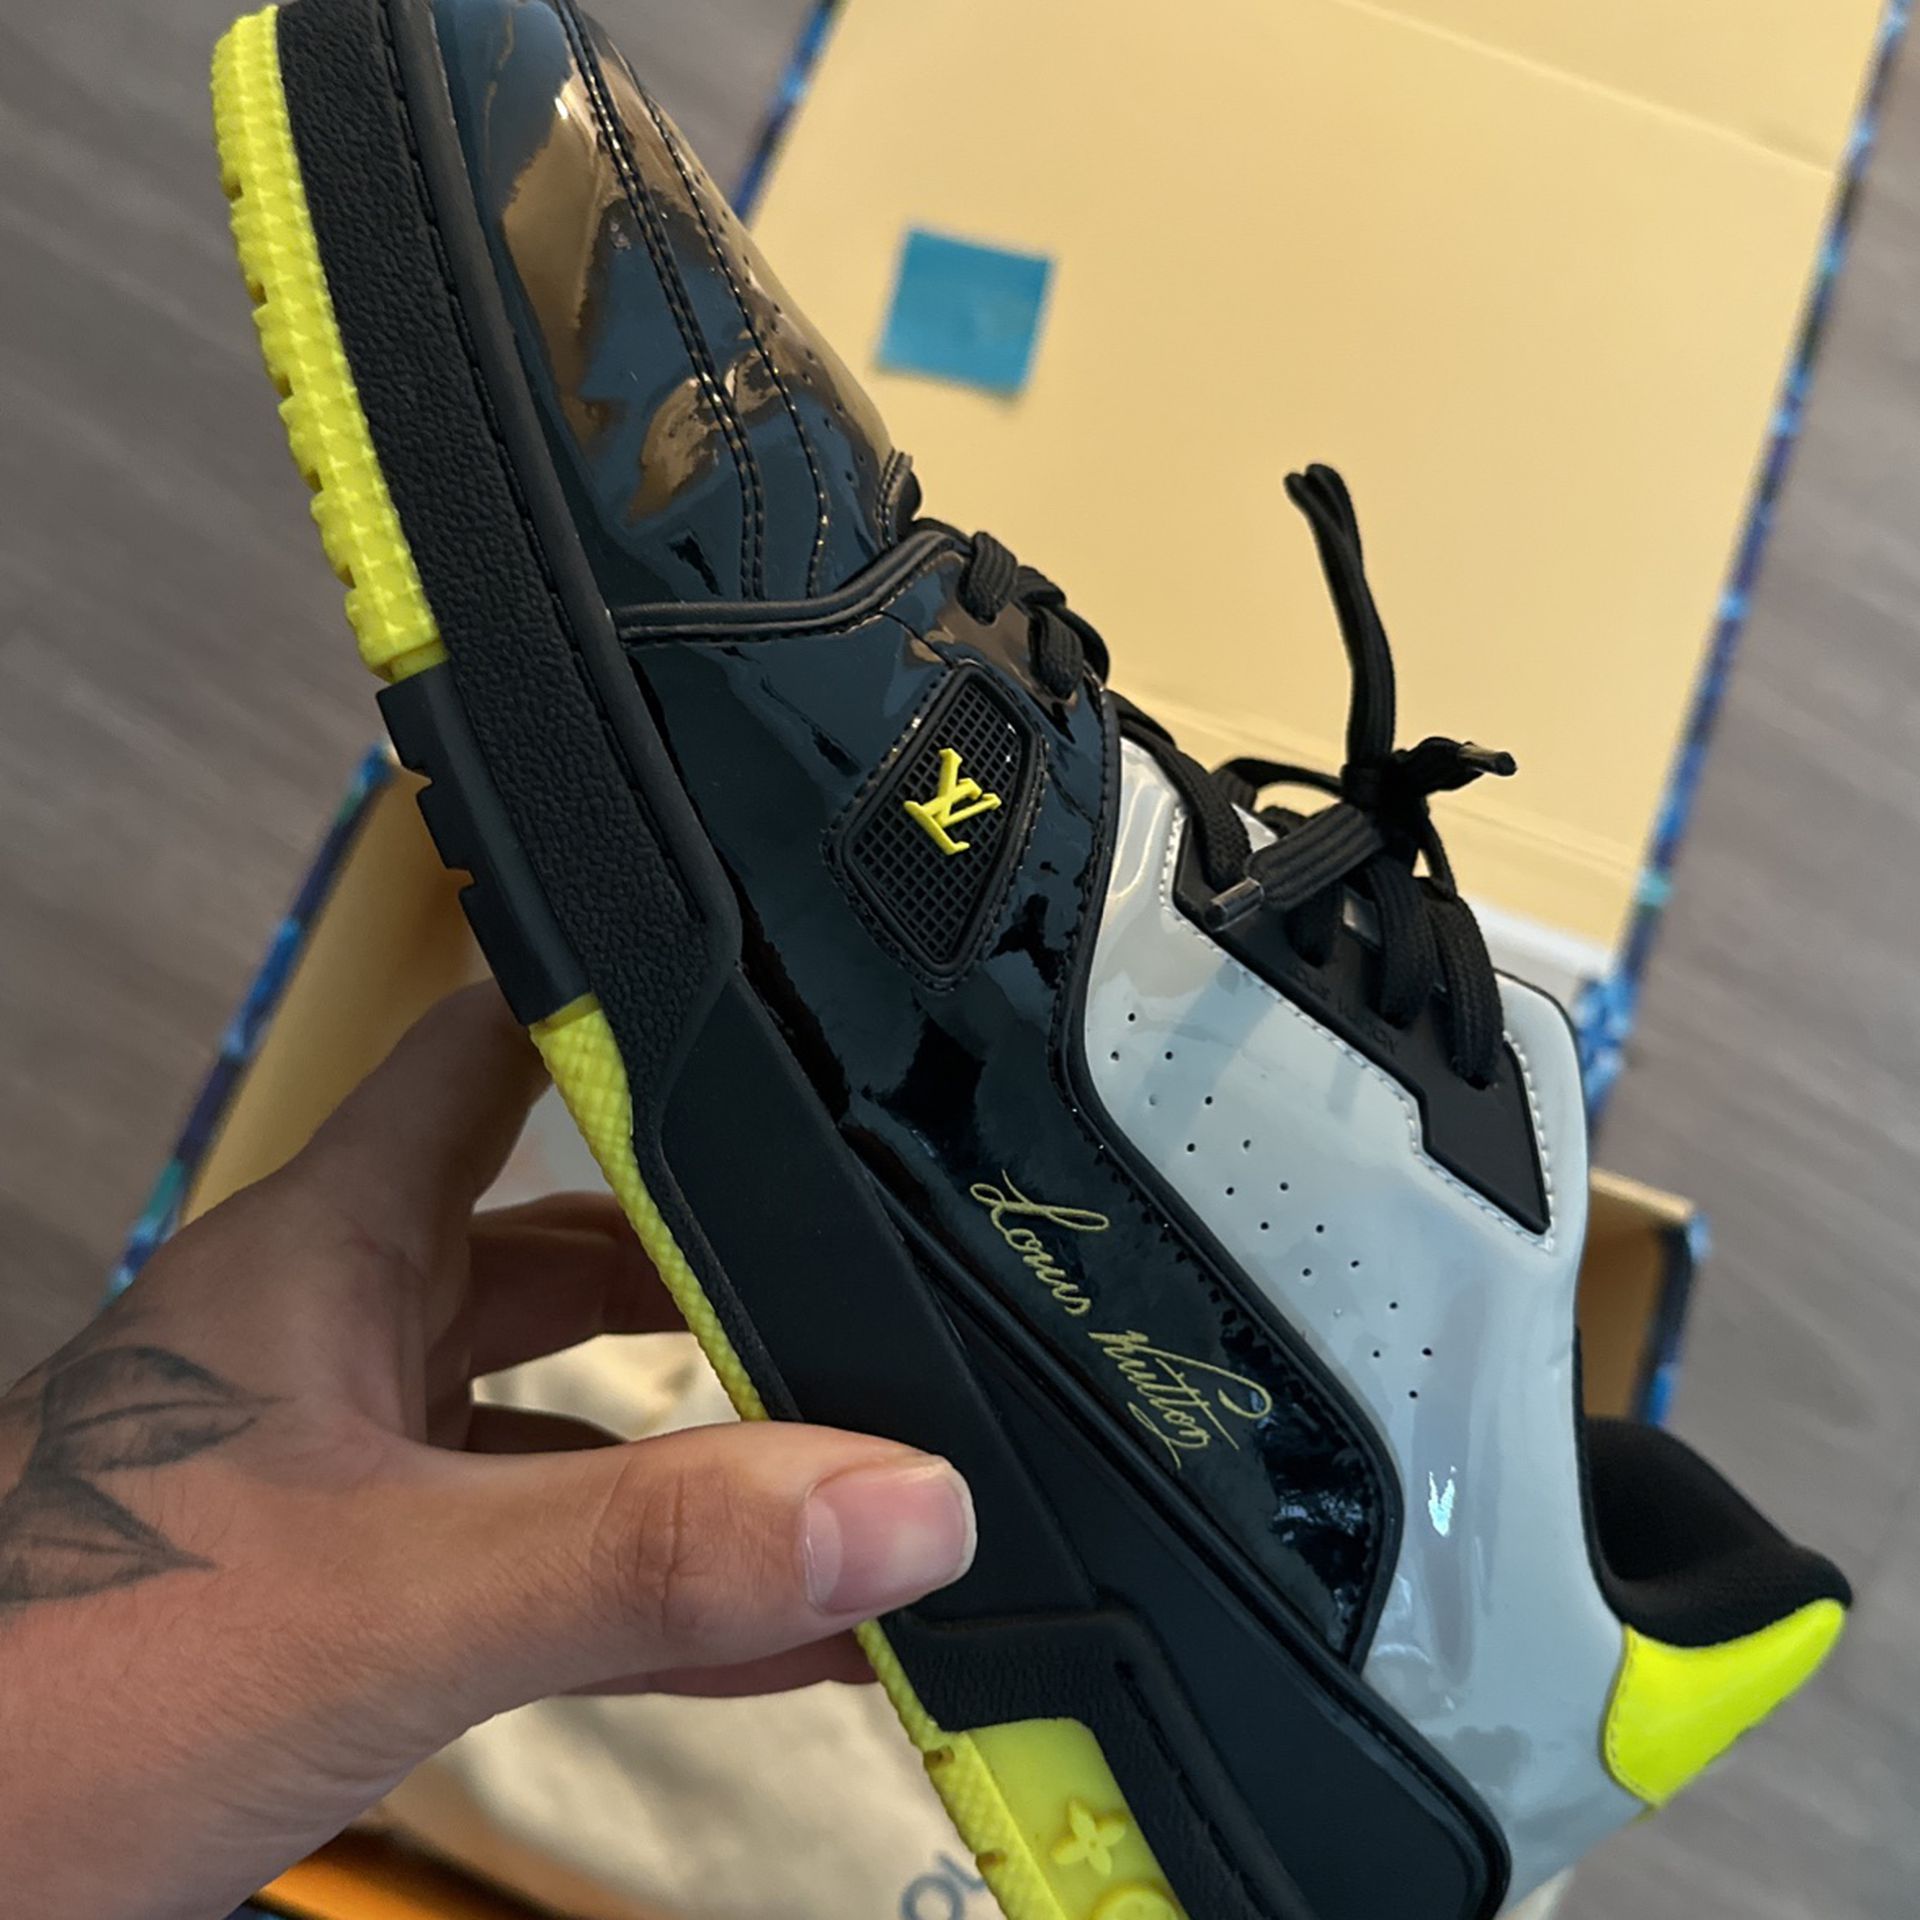 Louis Vuitton Trainer Sneaker Size 9 for Sale in Houston, TX - OfferUp